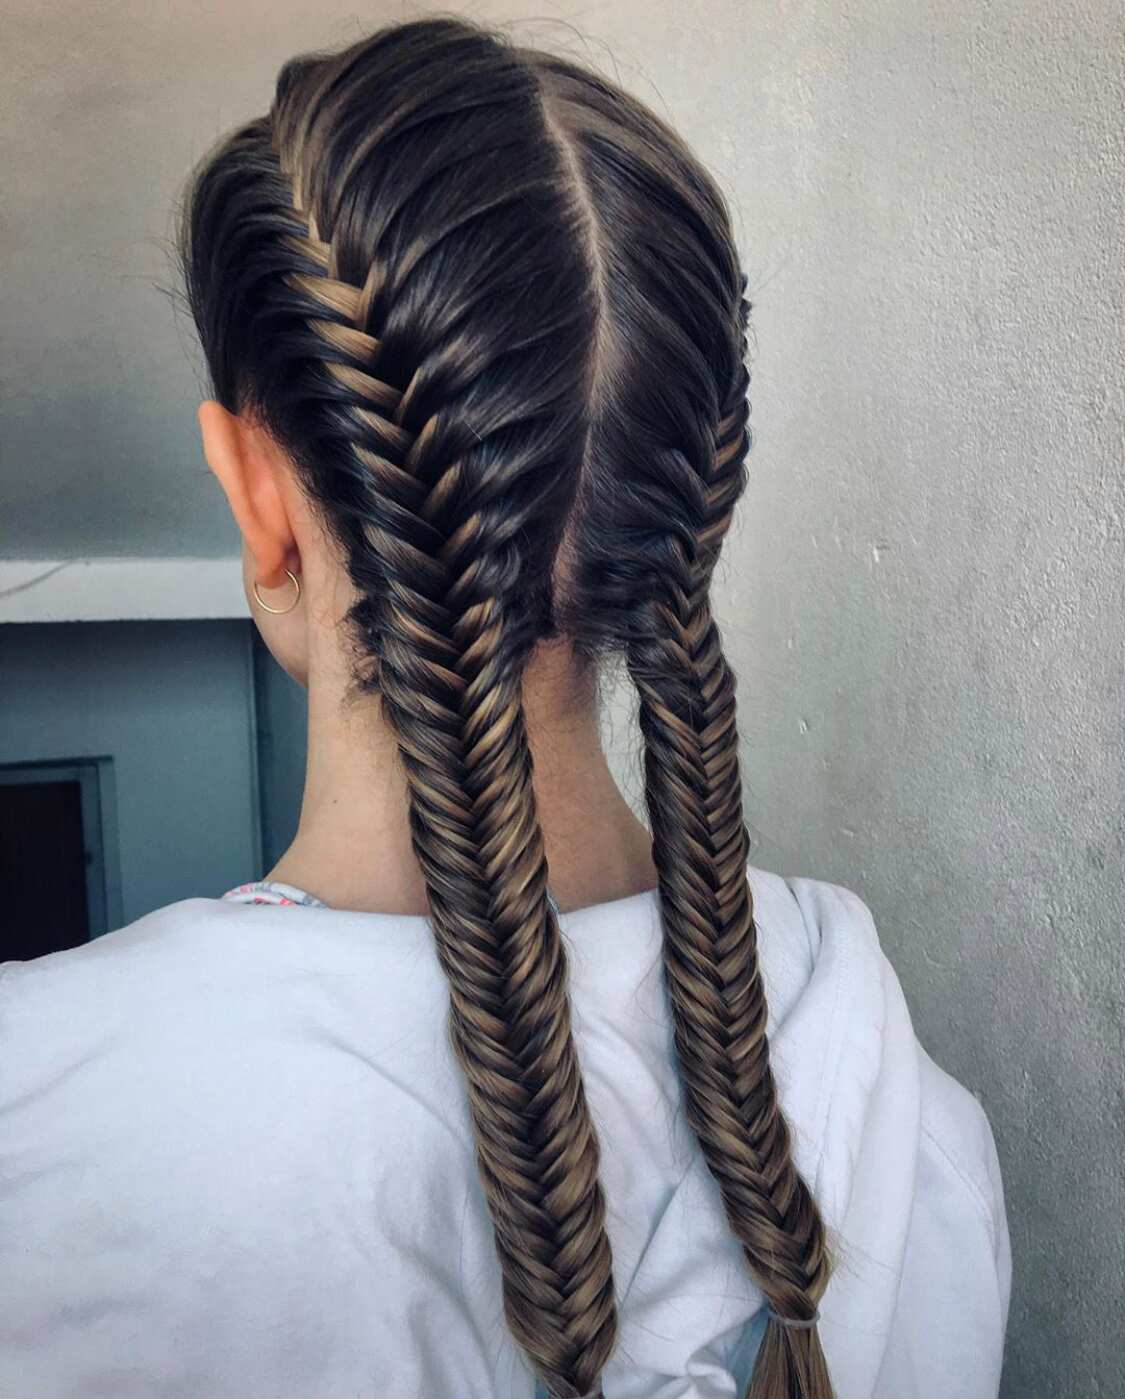 Loose Boho Chic Fishtail Braid on Long Platinum Blonde Hair - The Latest  Hairstyles for Men and Women (2020) - Hairstyleology